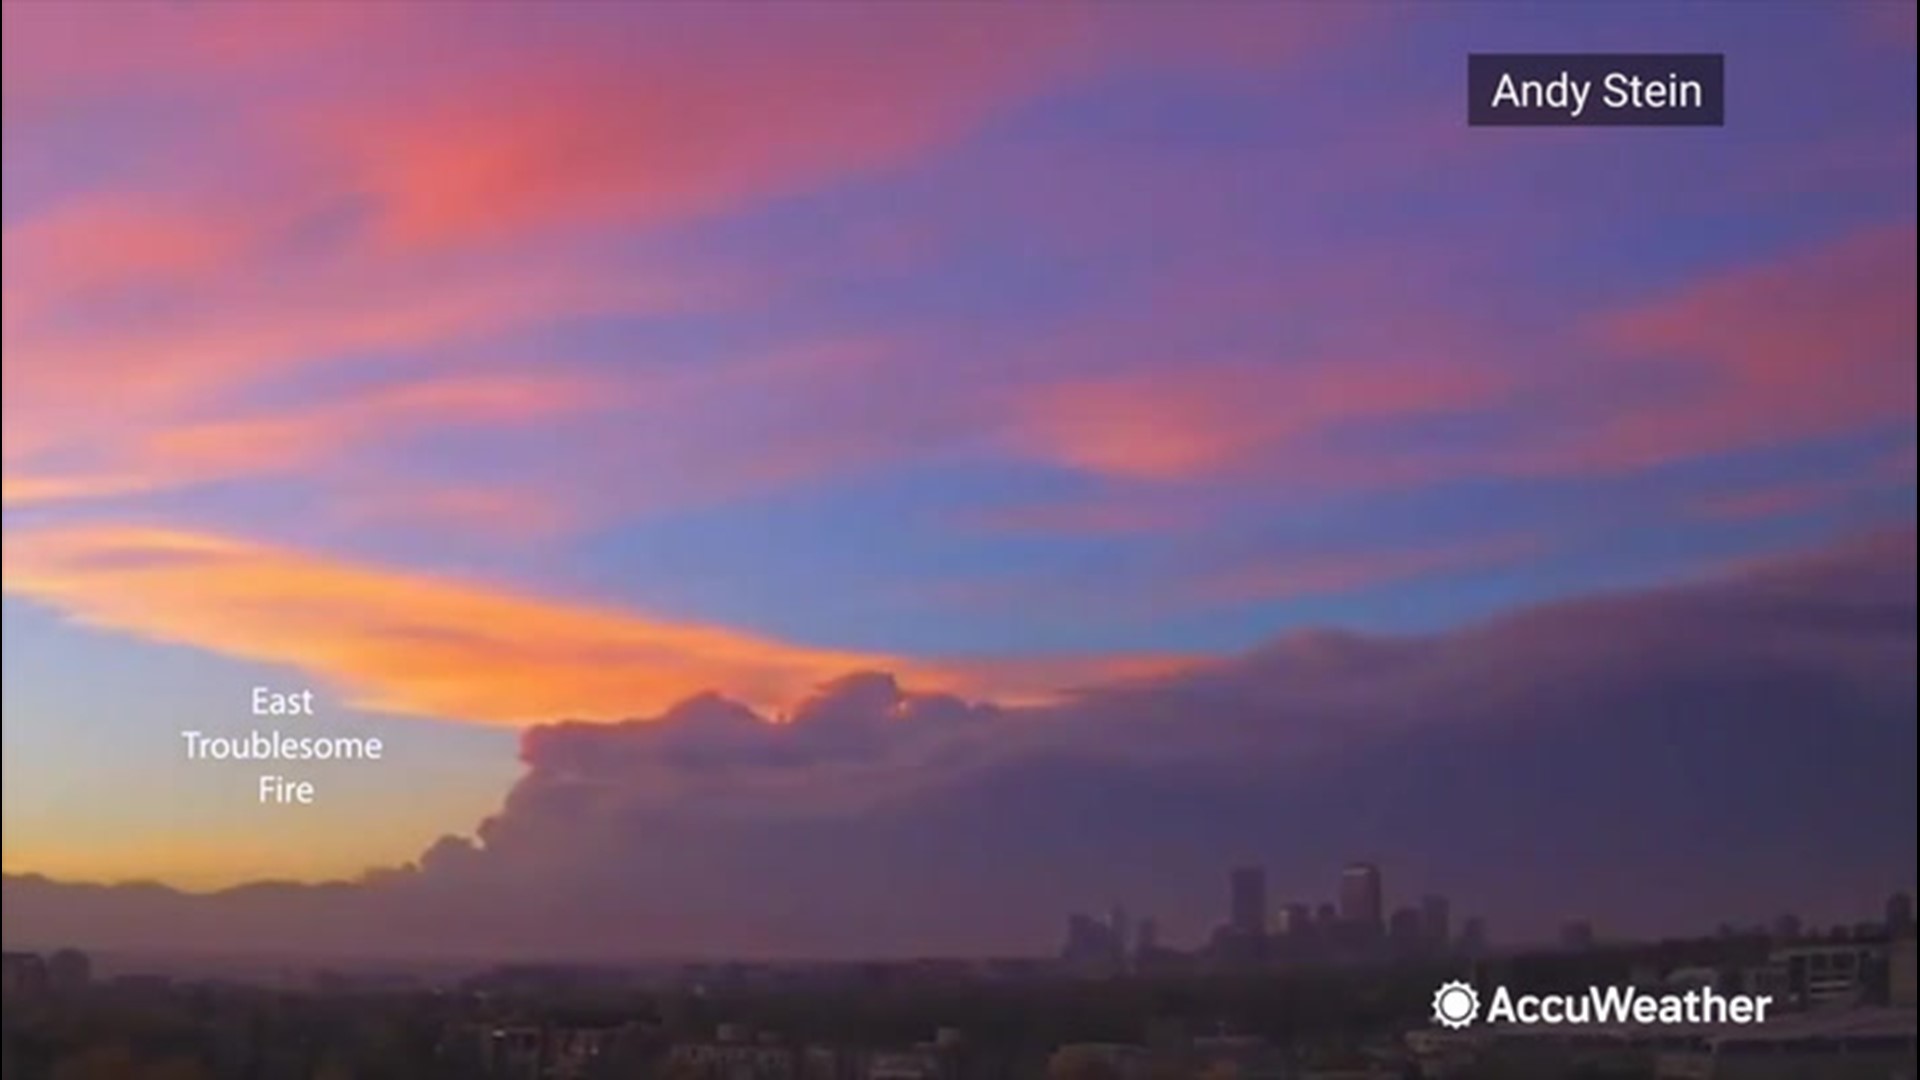 A breathtaking sunset is seen against the terrible smoke from the East Troublesome Fire in a time-lapse video from Denver, Colorado, on Oct. 21.